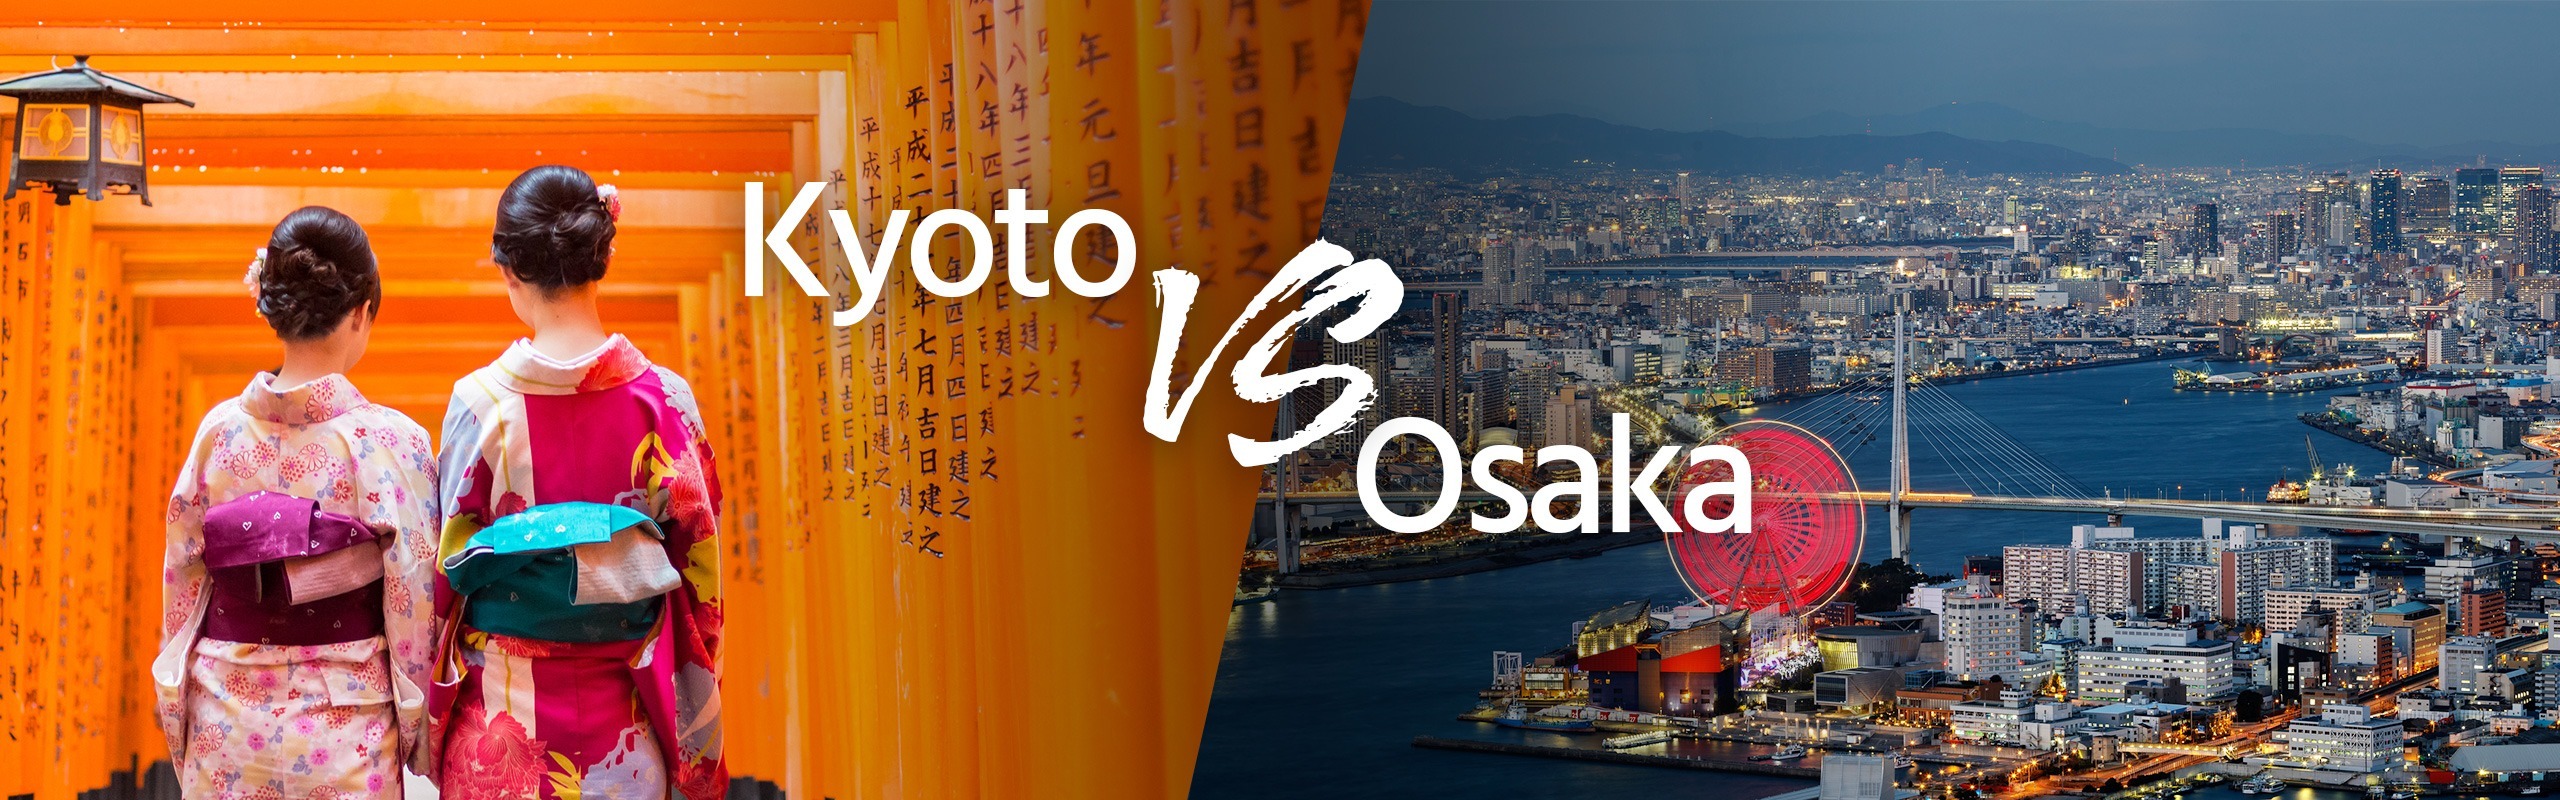 Kyoto vs Osaka: Which is Better to Visit in One Week in Japan?